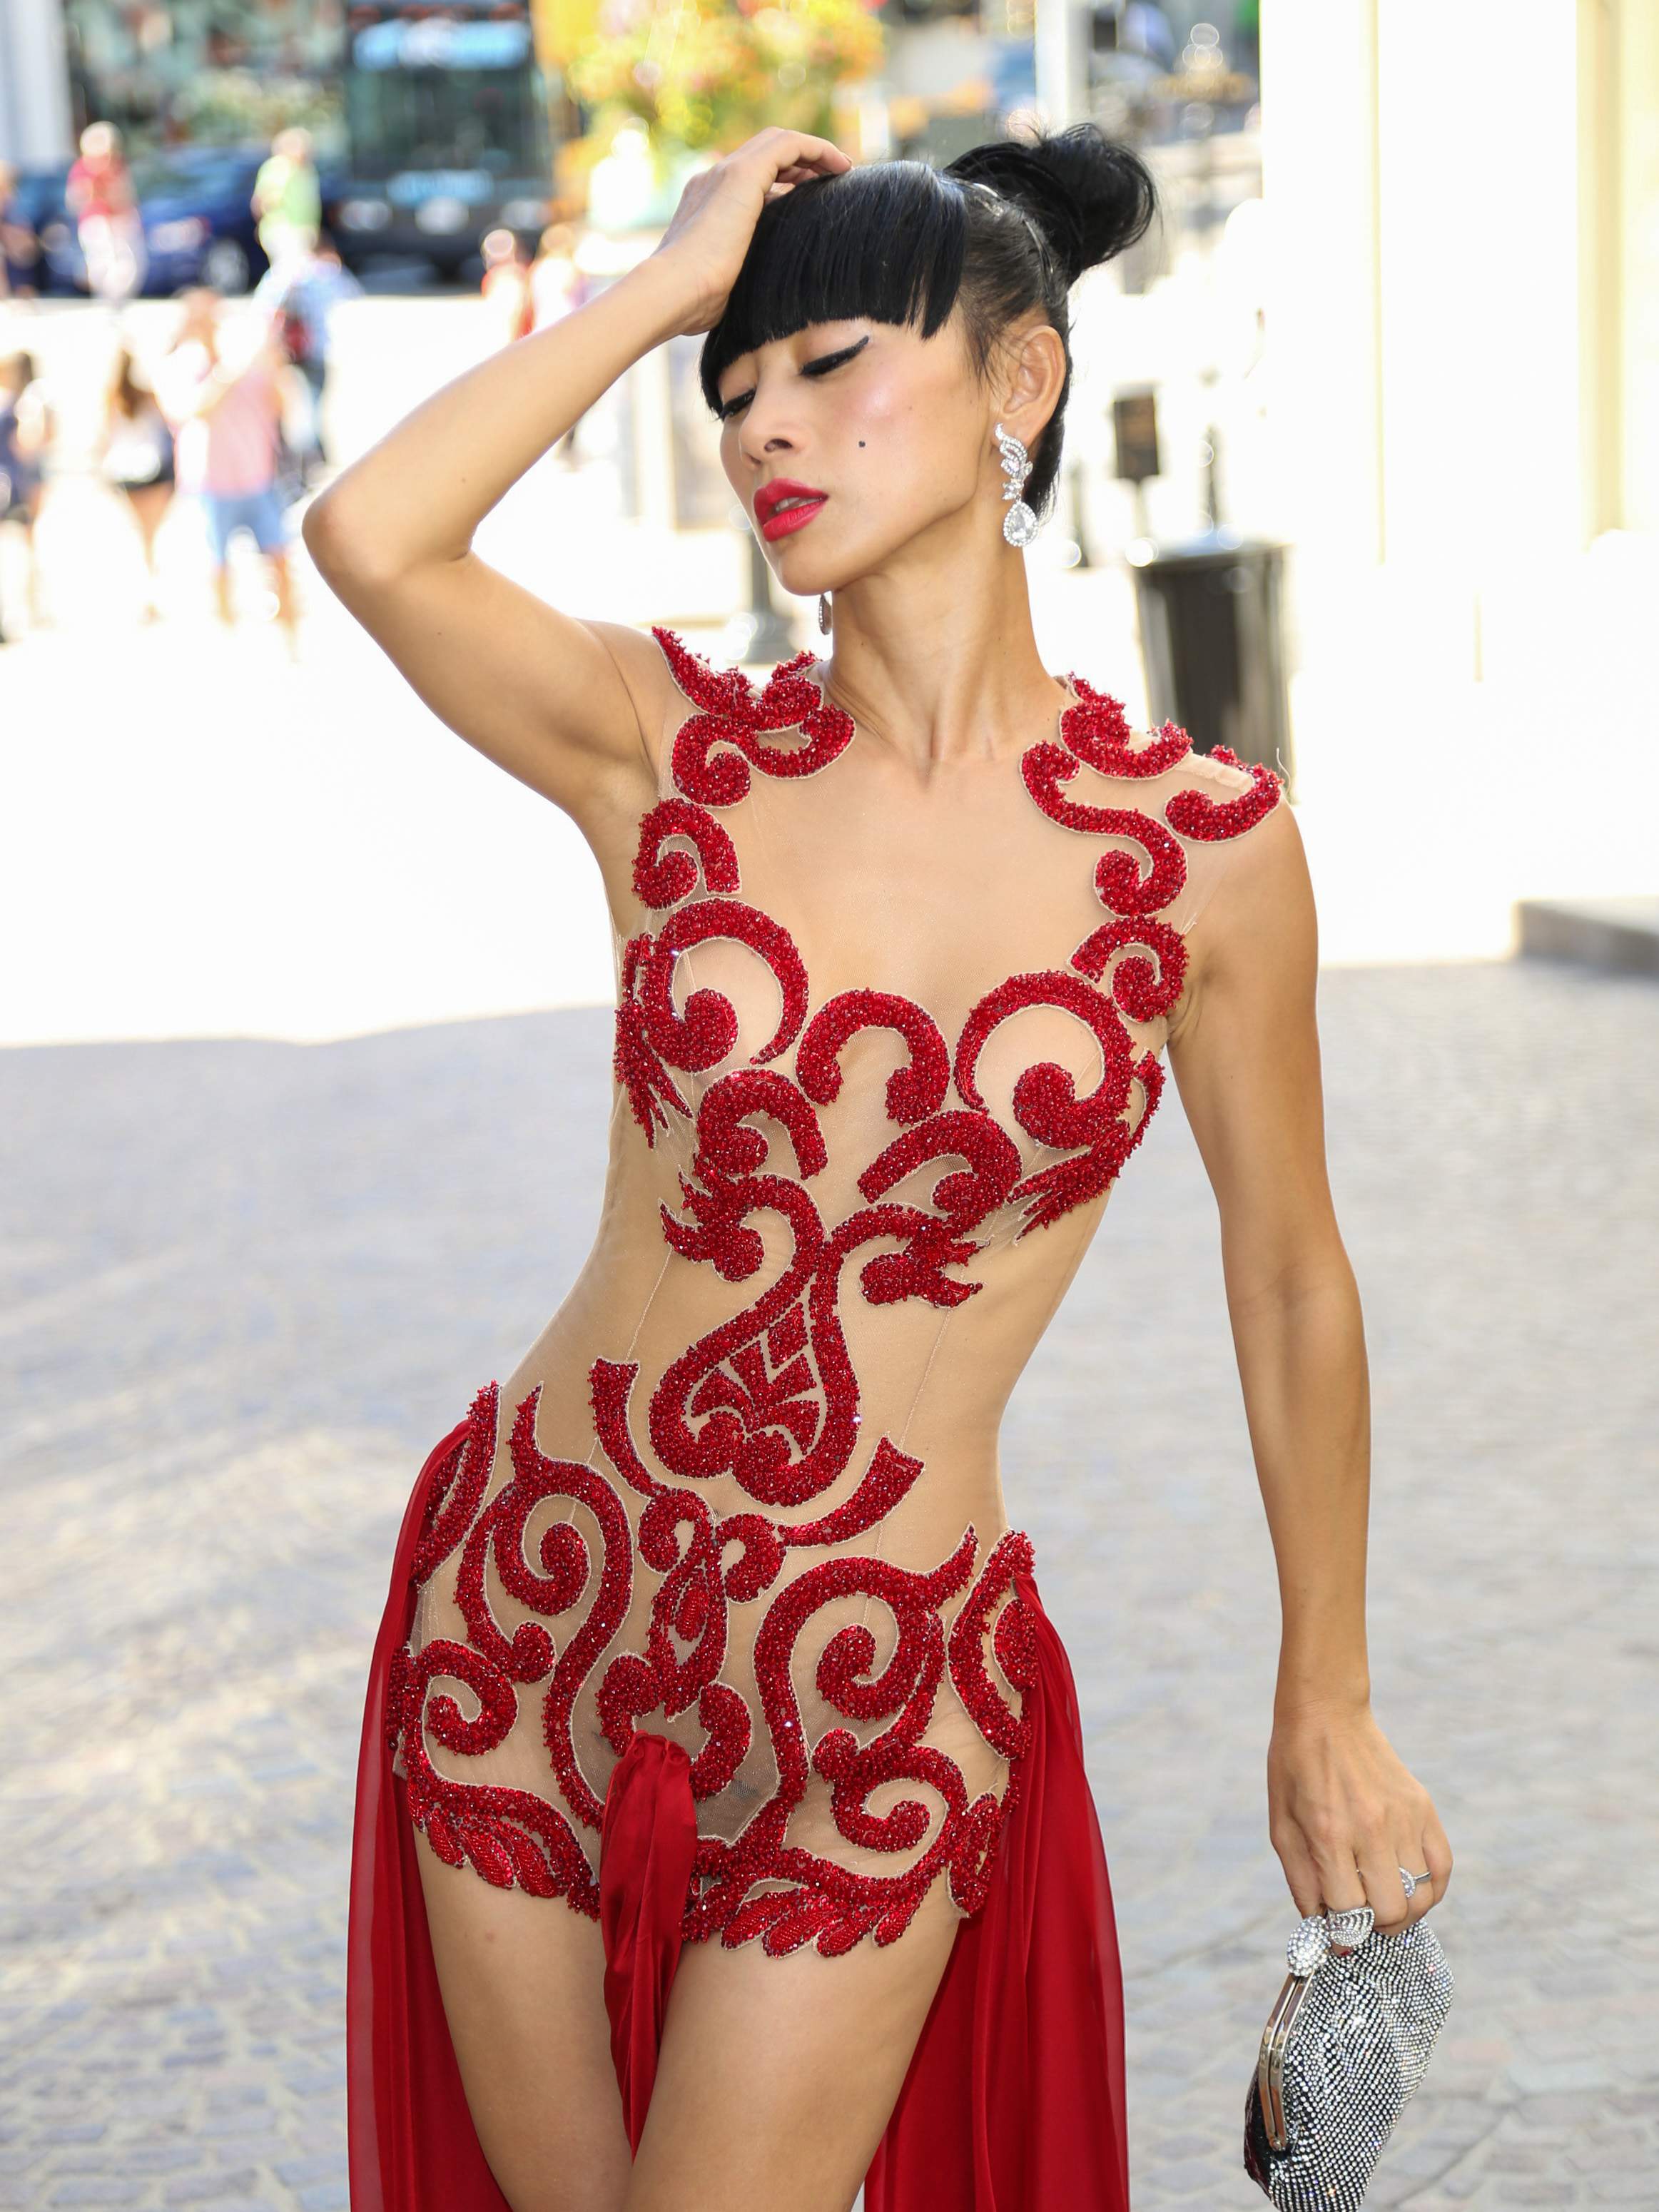 bai-ling-pantyless-and-nipples-in-see-through-outfit-01.jpg